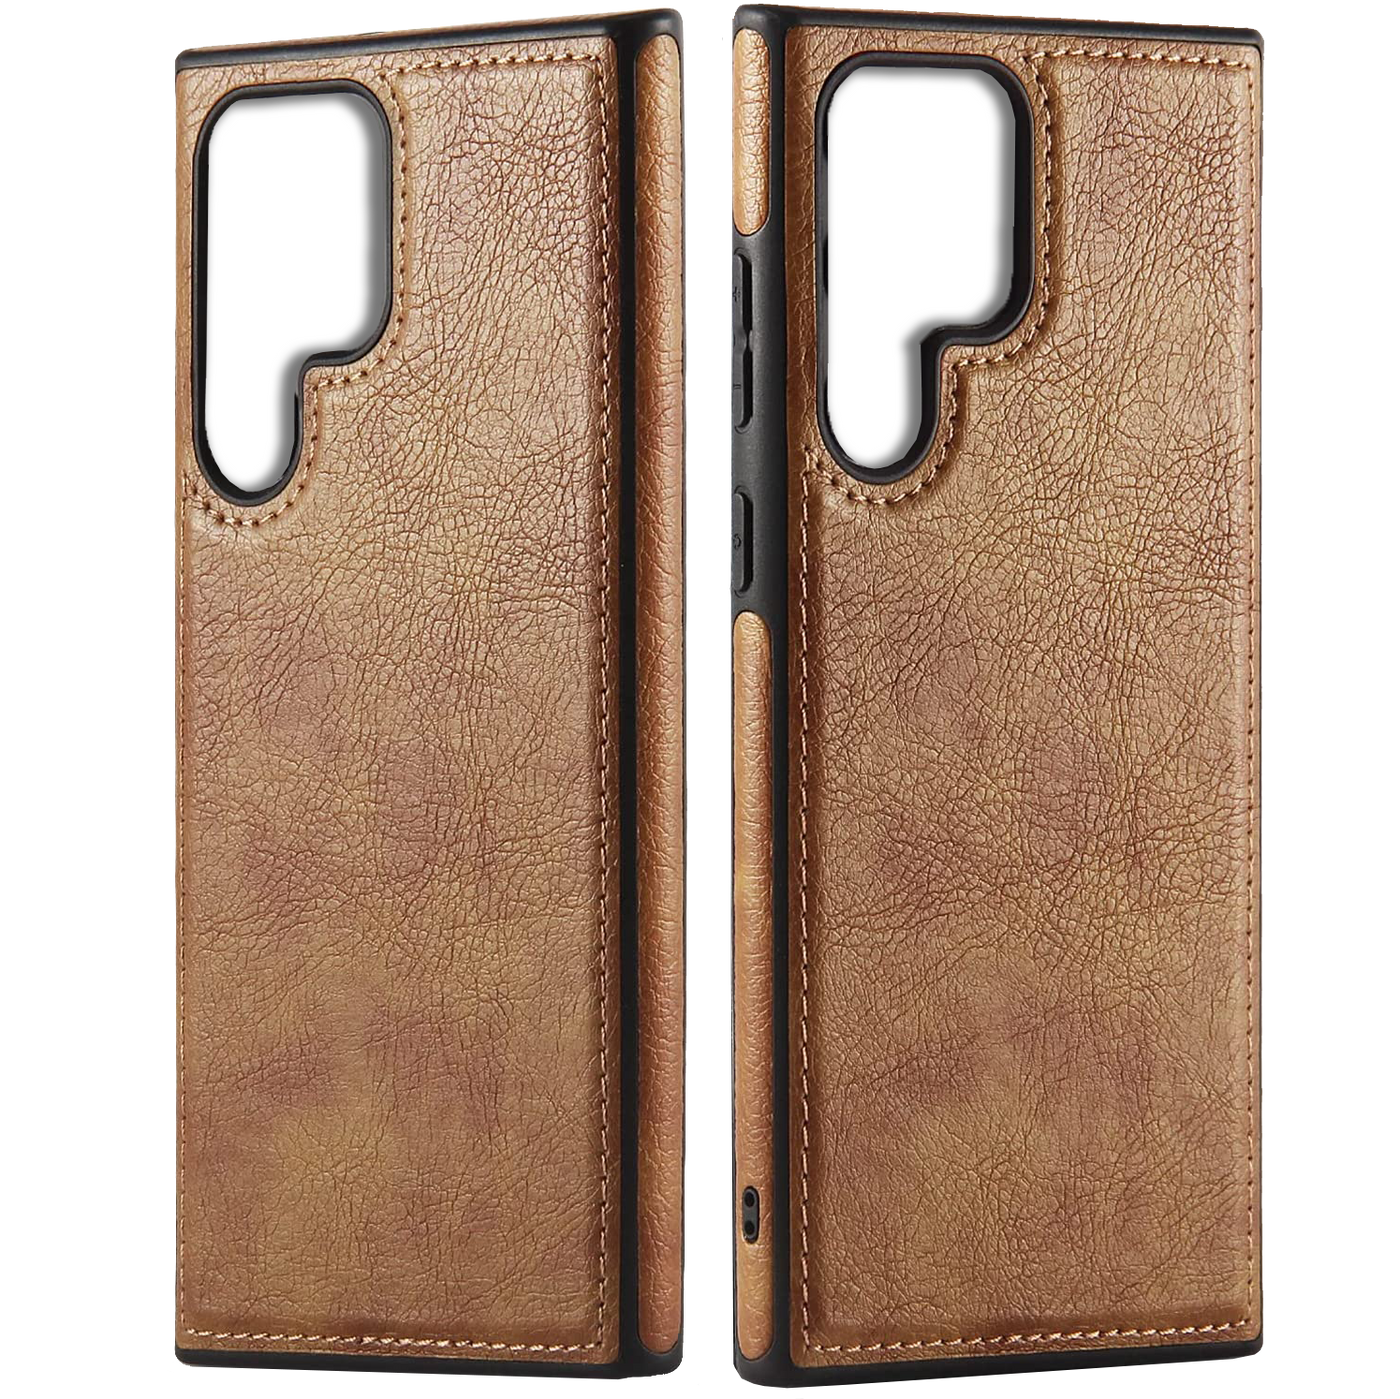 Excelsior Premium PU Leather Back Cover case For Samsung Galaxy S23 Ultra 5G